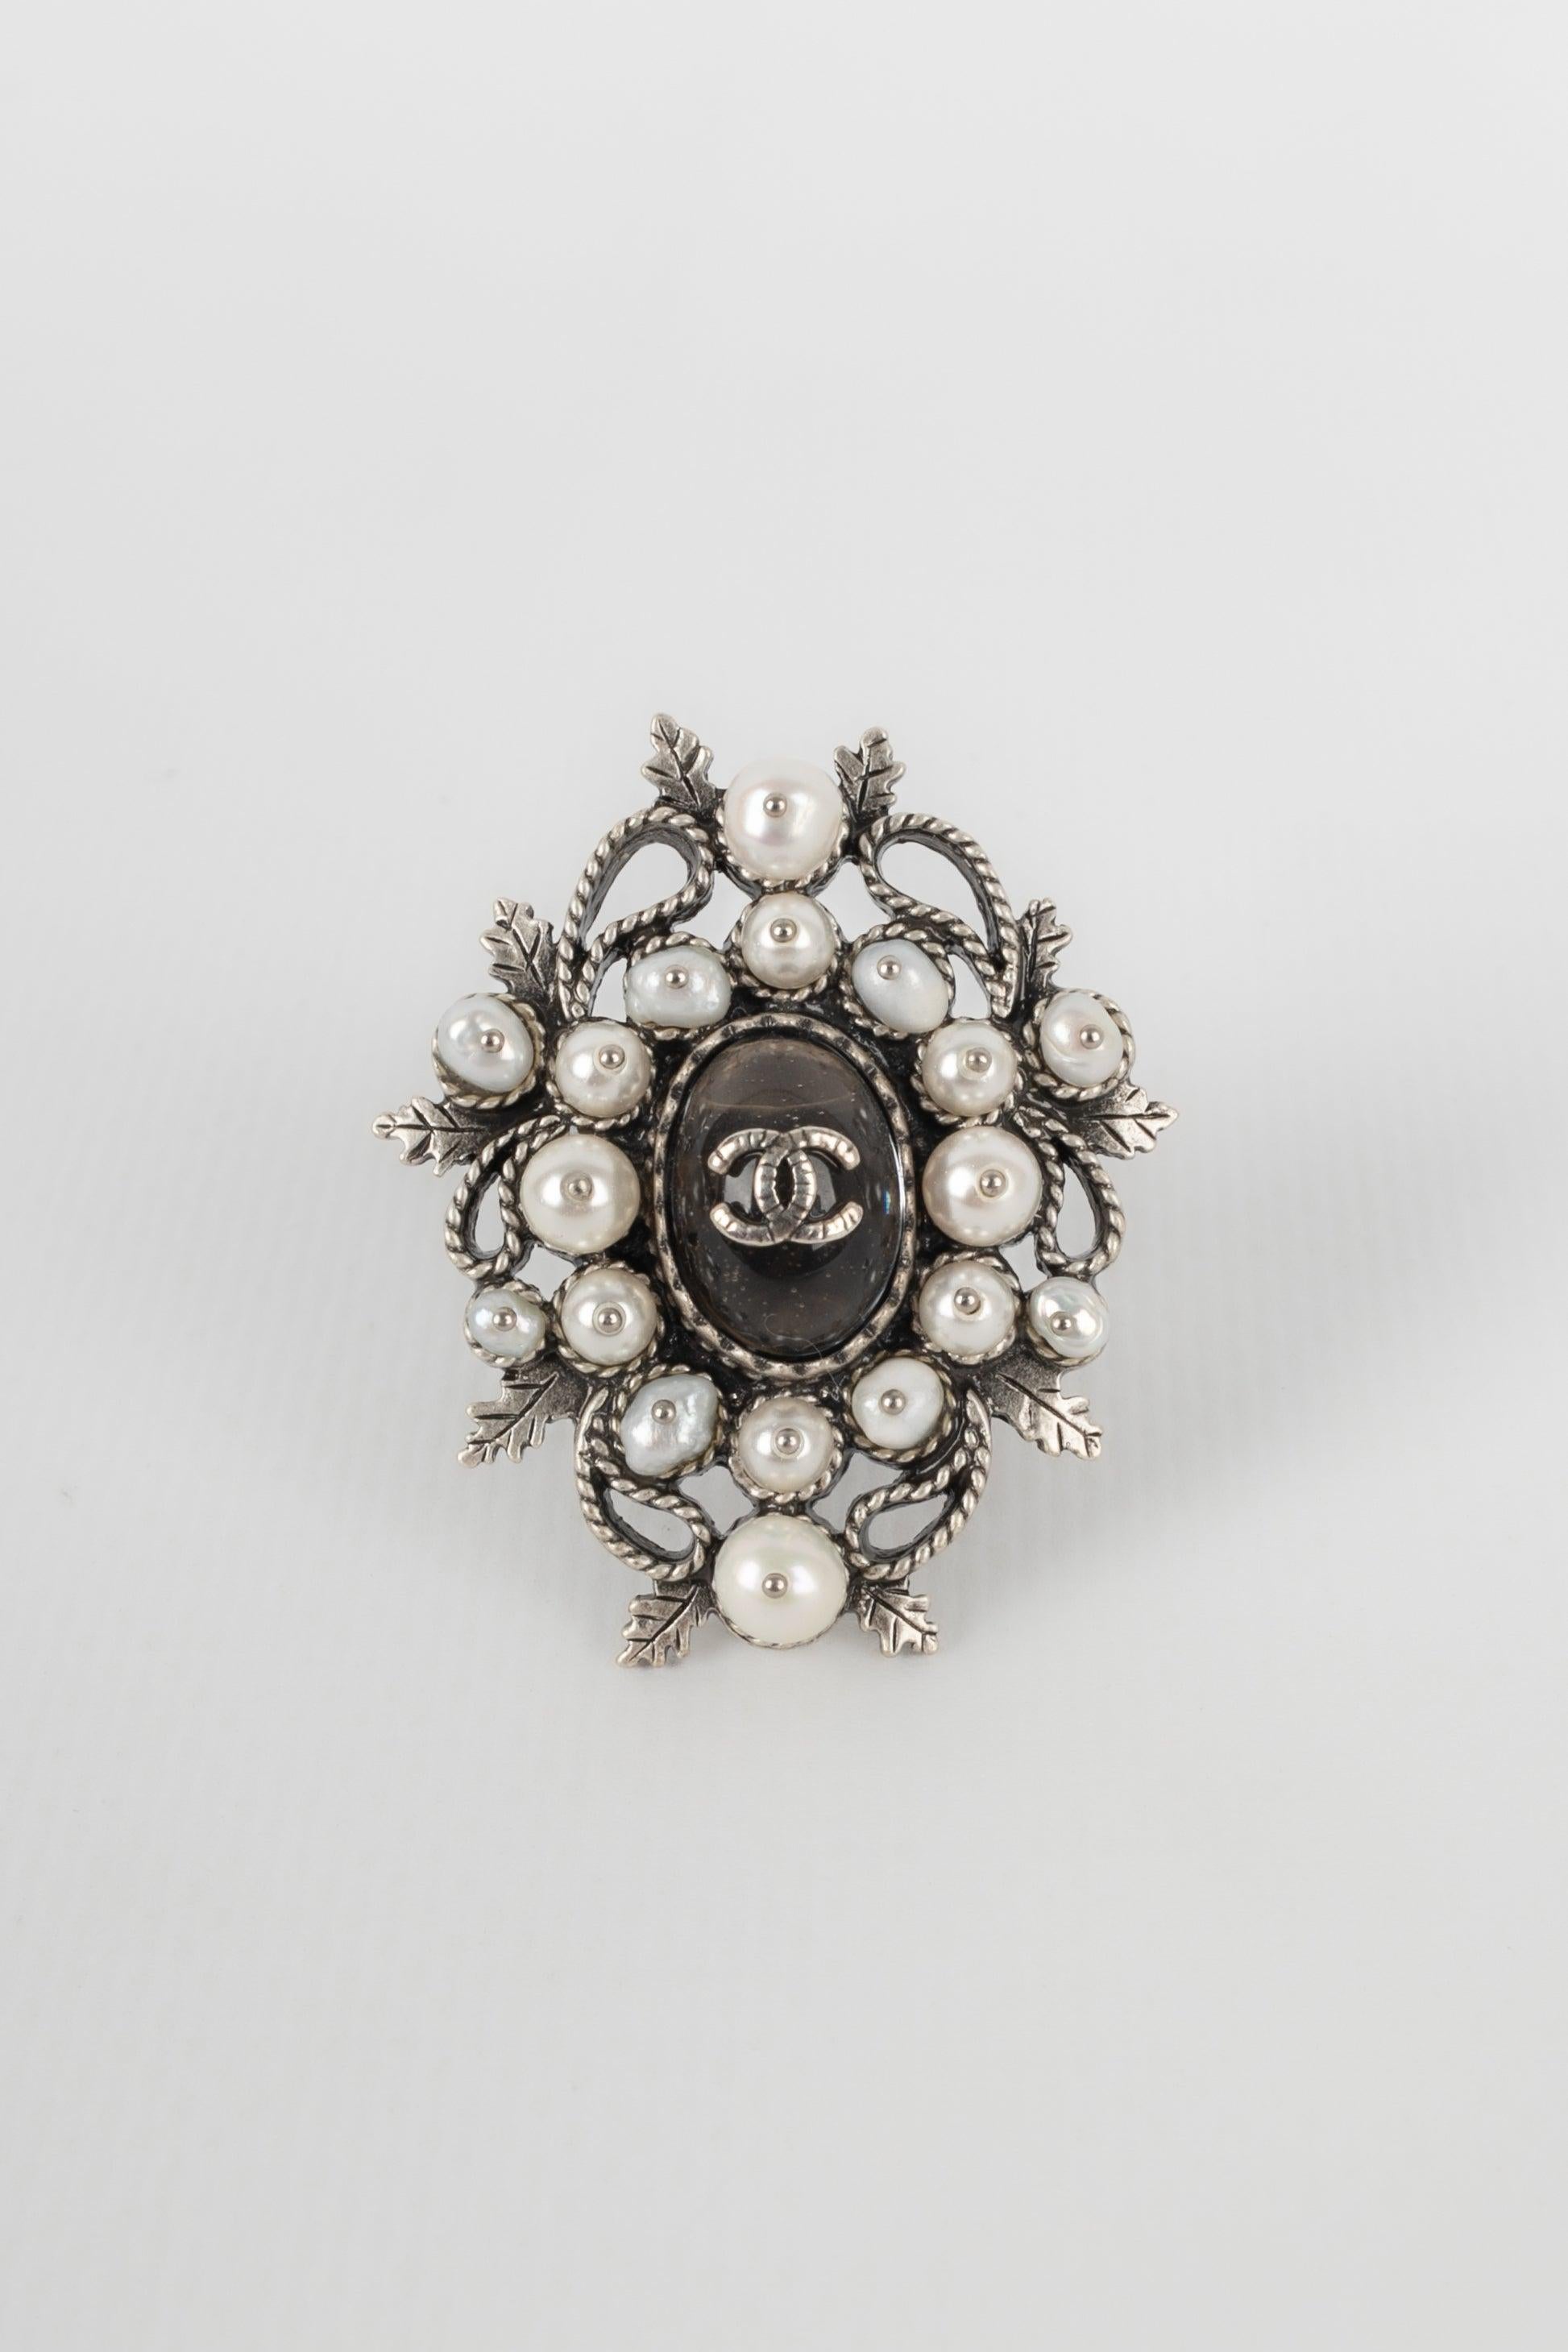 Chanel - (Made in France) Silvery metal ring with costume pearls. 2015 Collection.

Additional information:
Condition: Very good condition
Dimensions: Size 51
Period: 21st Century

Seller Reference: BGB7
